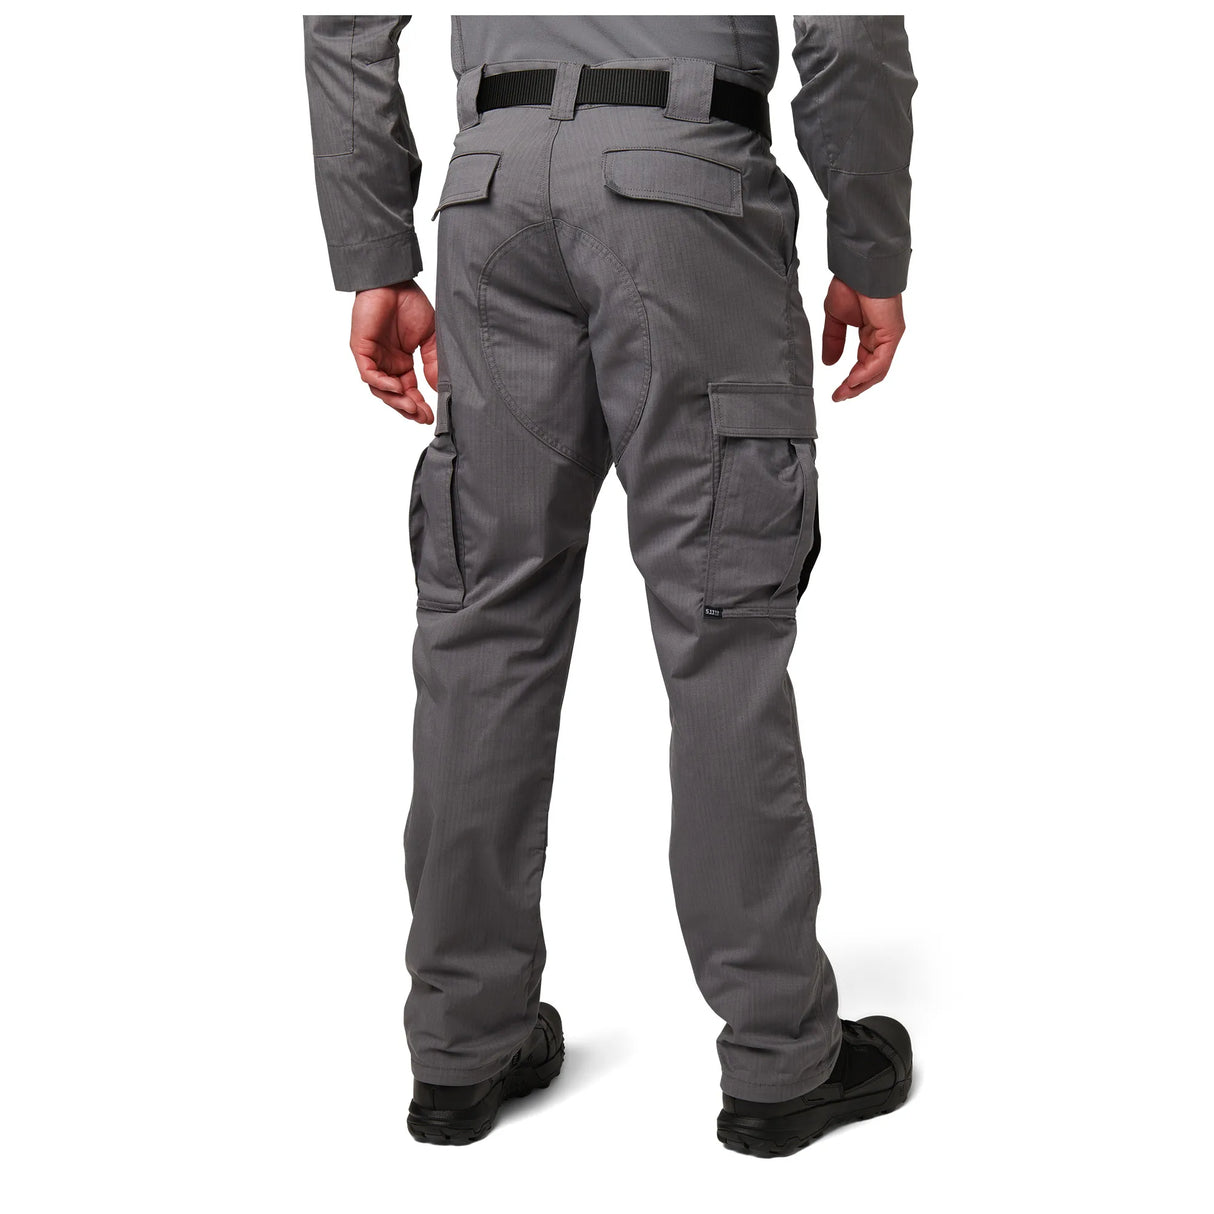 The 5.11 TDU® Pant is crafted from Flex-Tac® mechanical stretch fabric, offering durability and mobility for tactical operations. It features reinforced knees, large cargo pockets with TacTec™ compatibility, and removable blousing straps for customizable wear. (320)